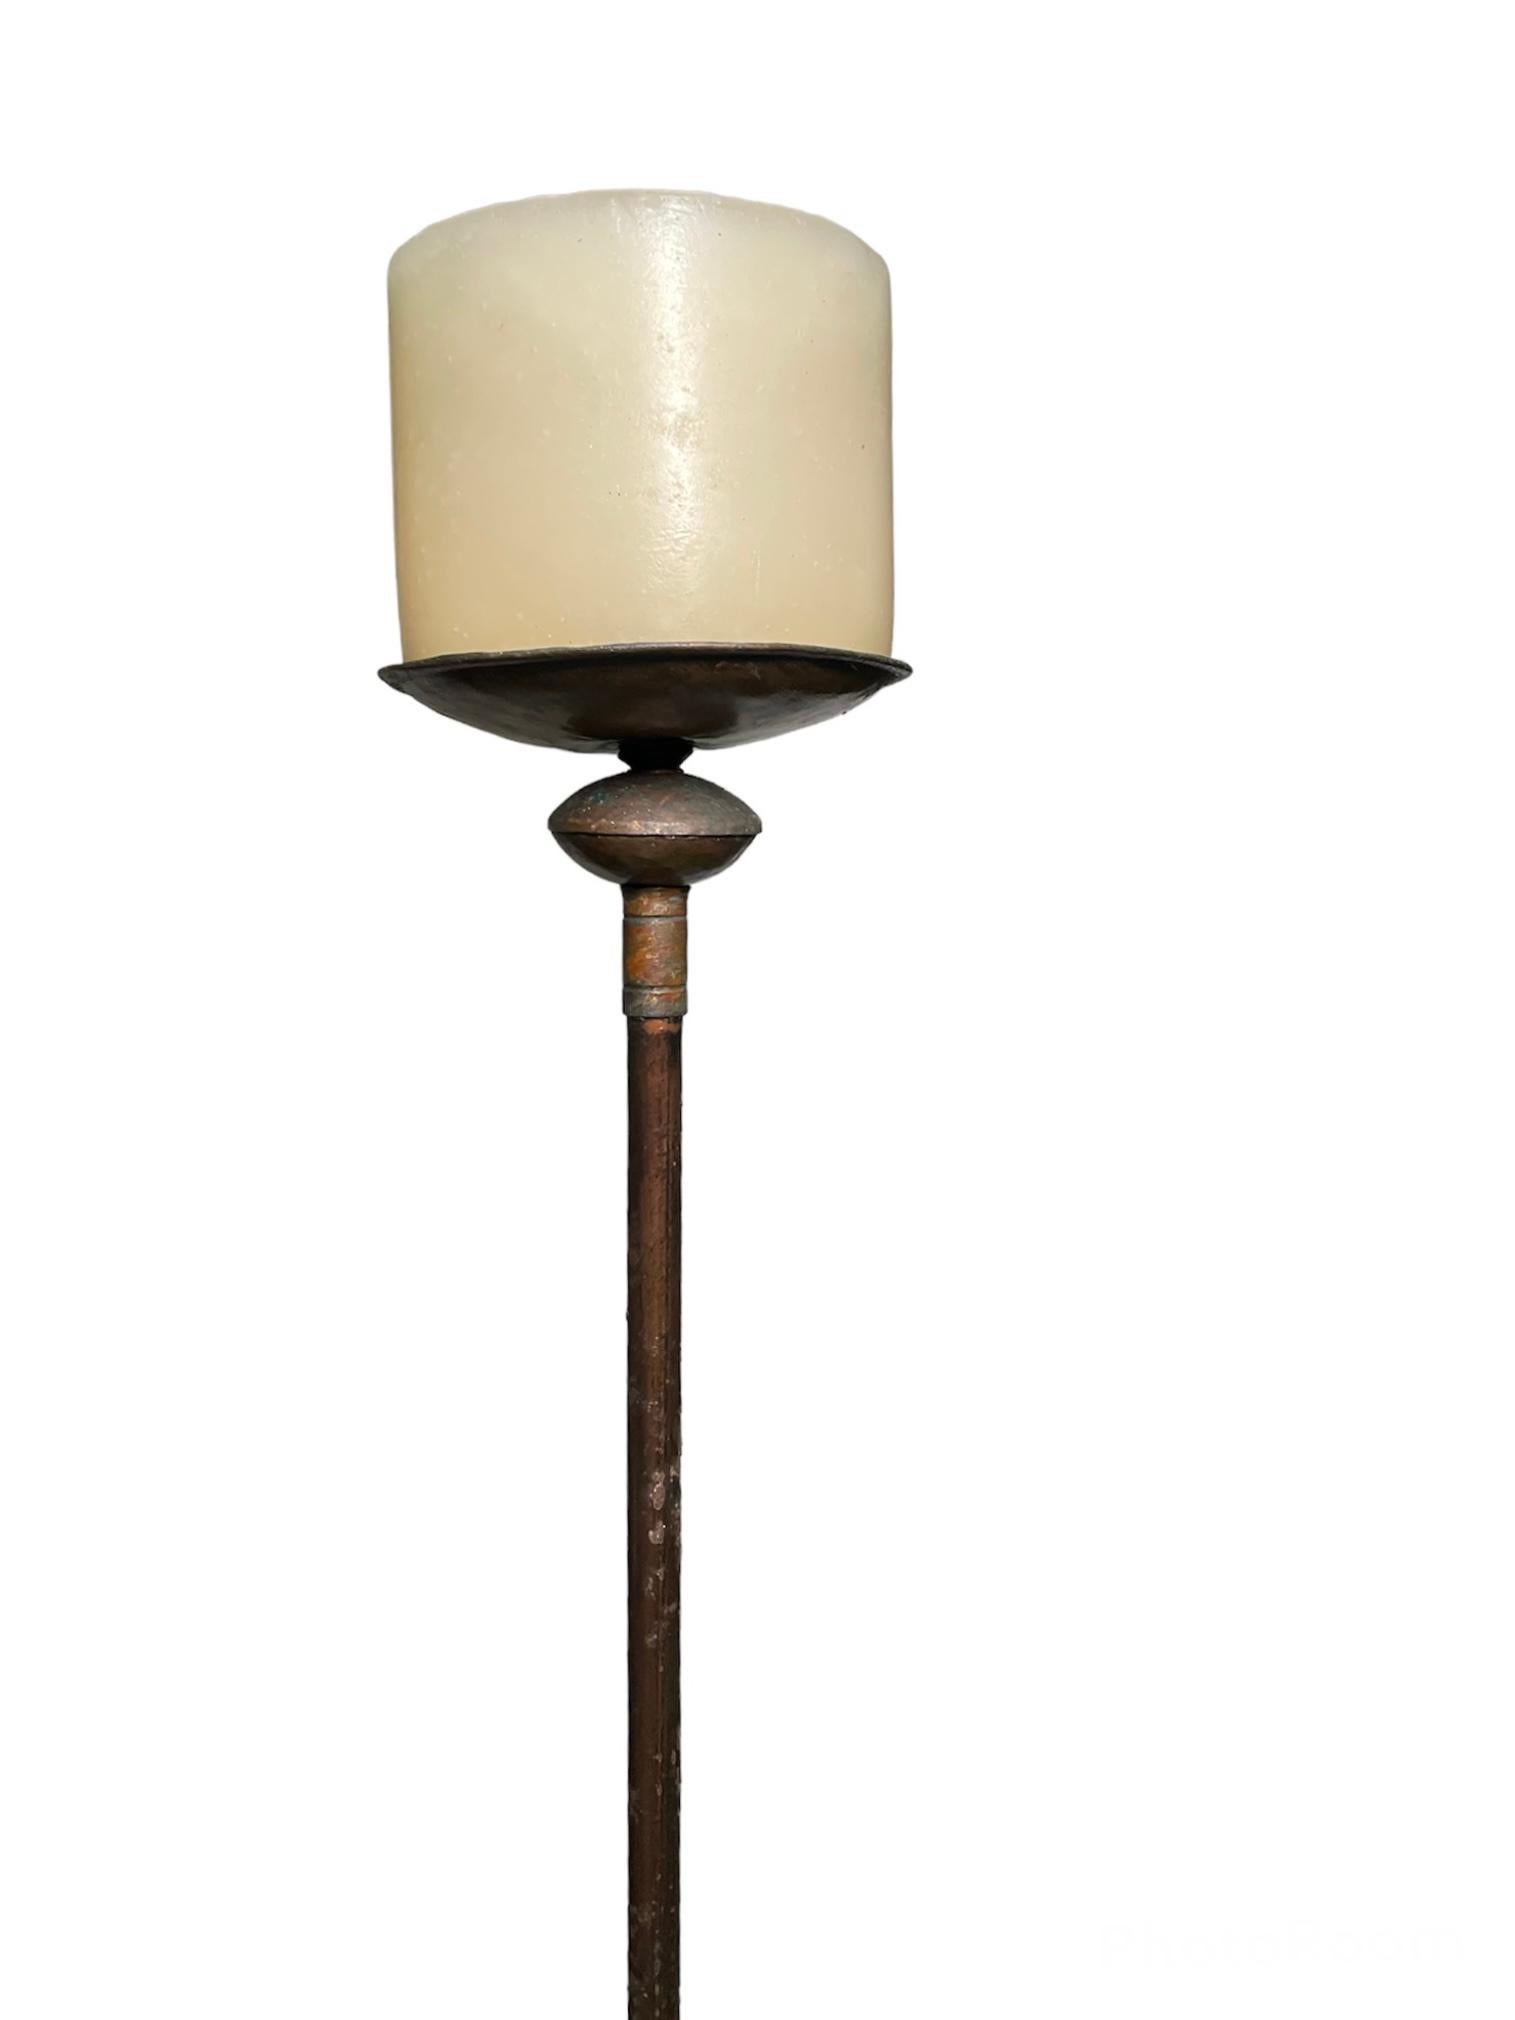 Gothic Style Wrought Iron Candle holder/Torchere In Good Condition For Sale In Guaynabo, PR